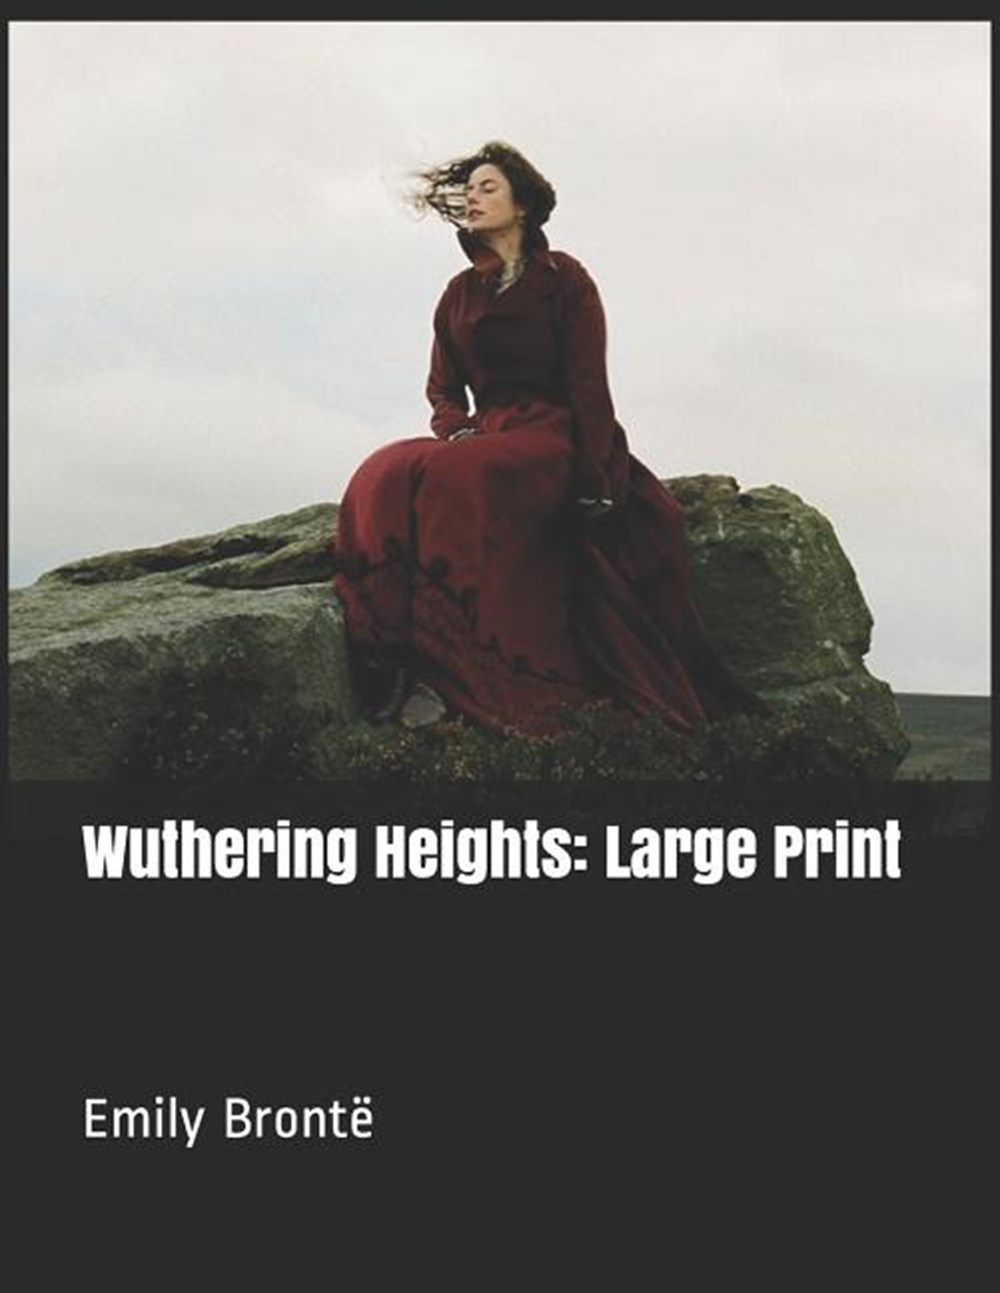 Wuthering Heights (Revised)